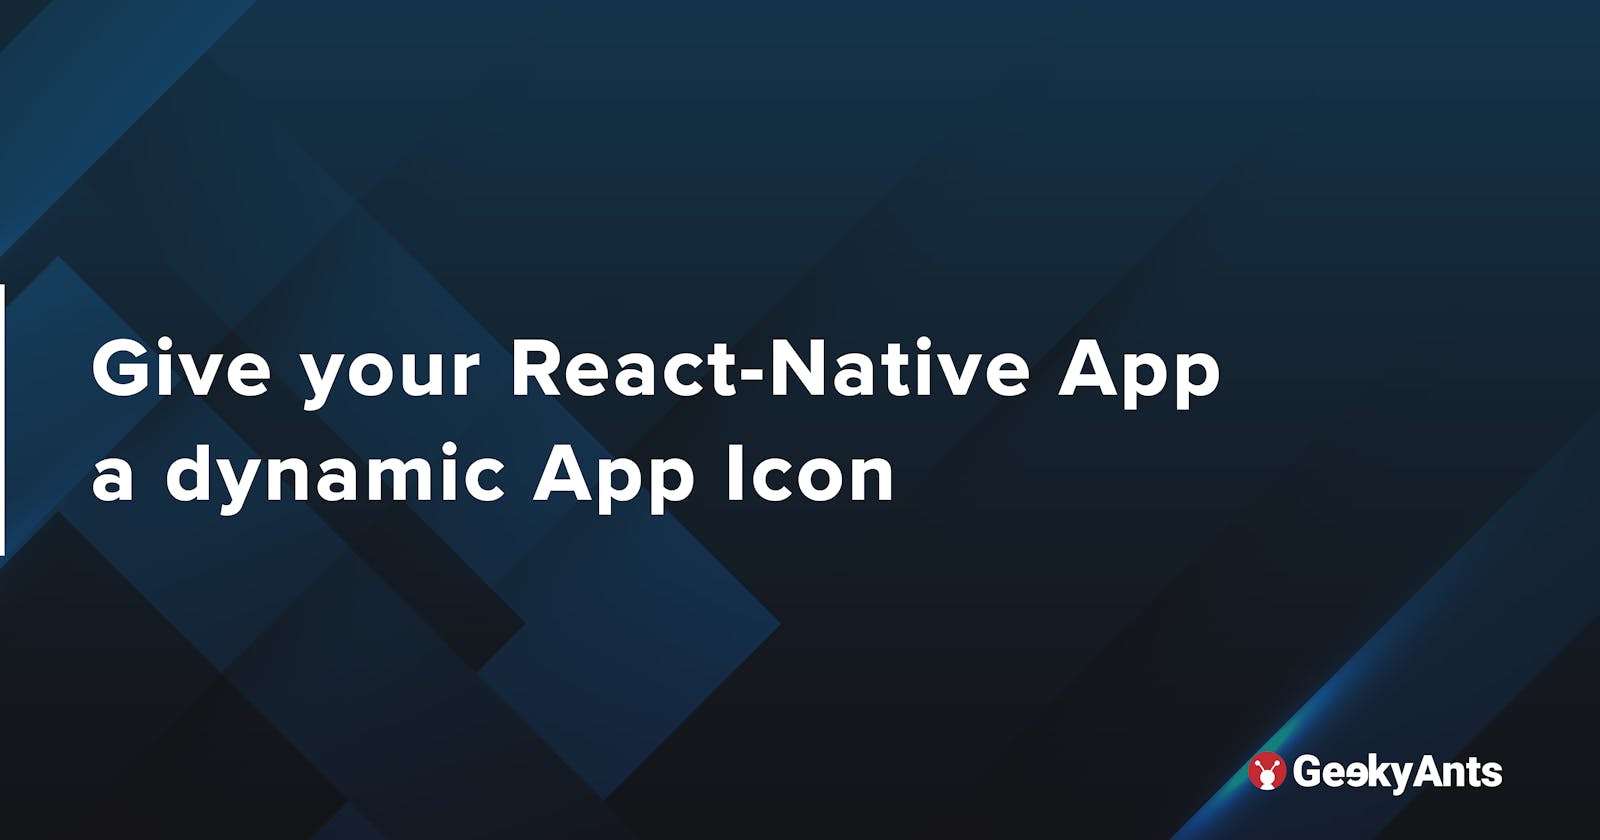 Give Your React-Native App a dynamic App Icon